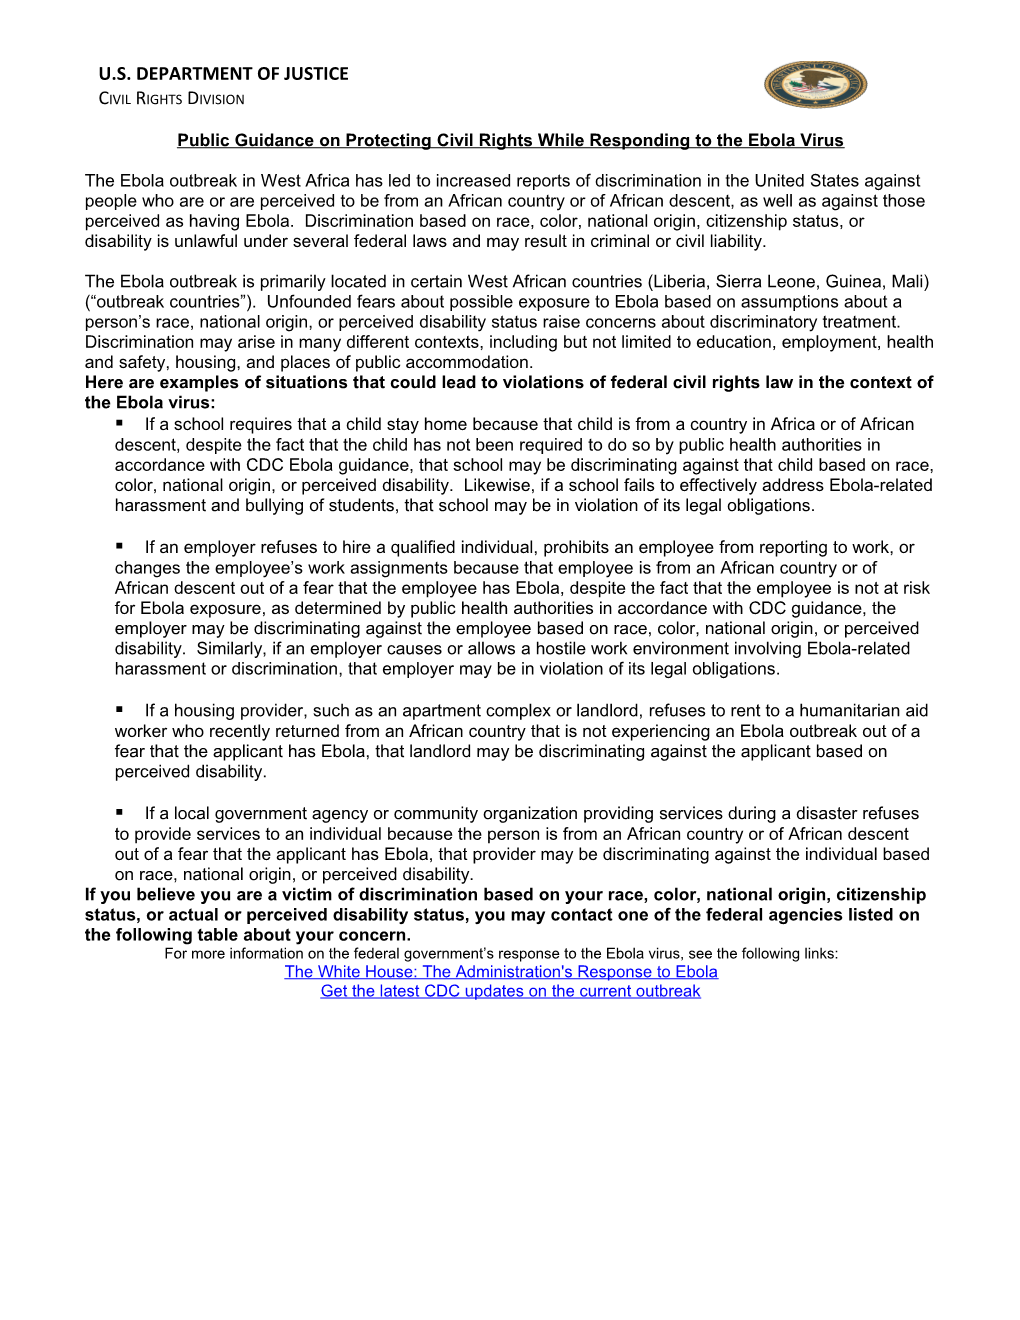 Public Guidance on Protecting Civil Rights While Responding to the Ebola Virus